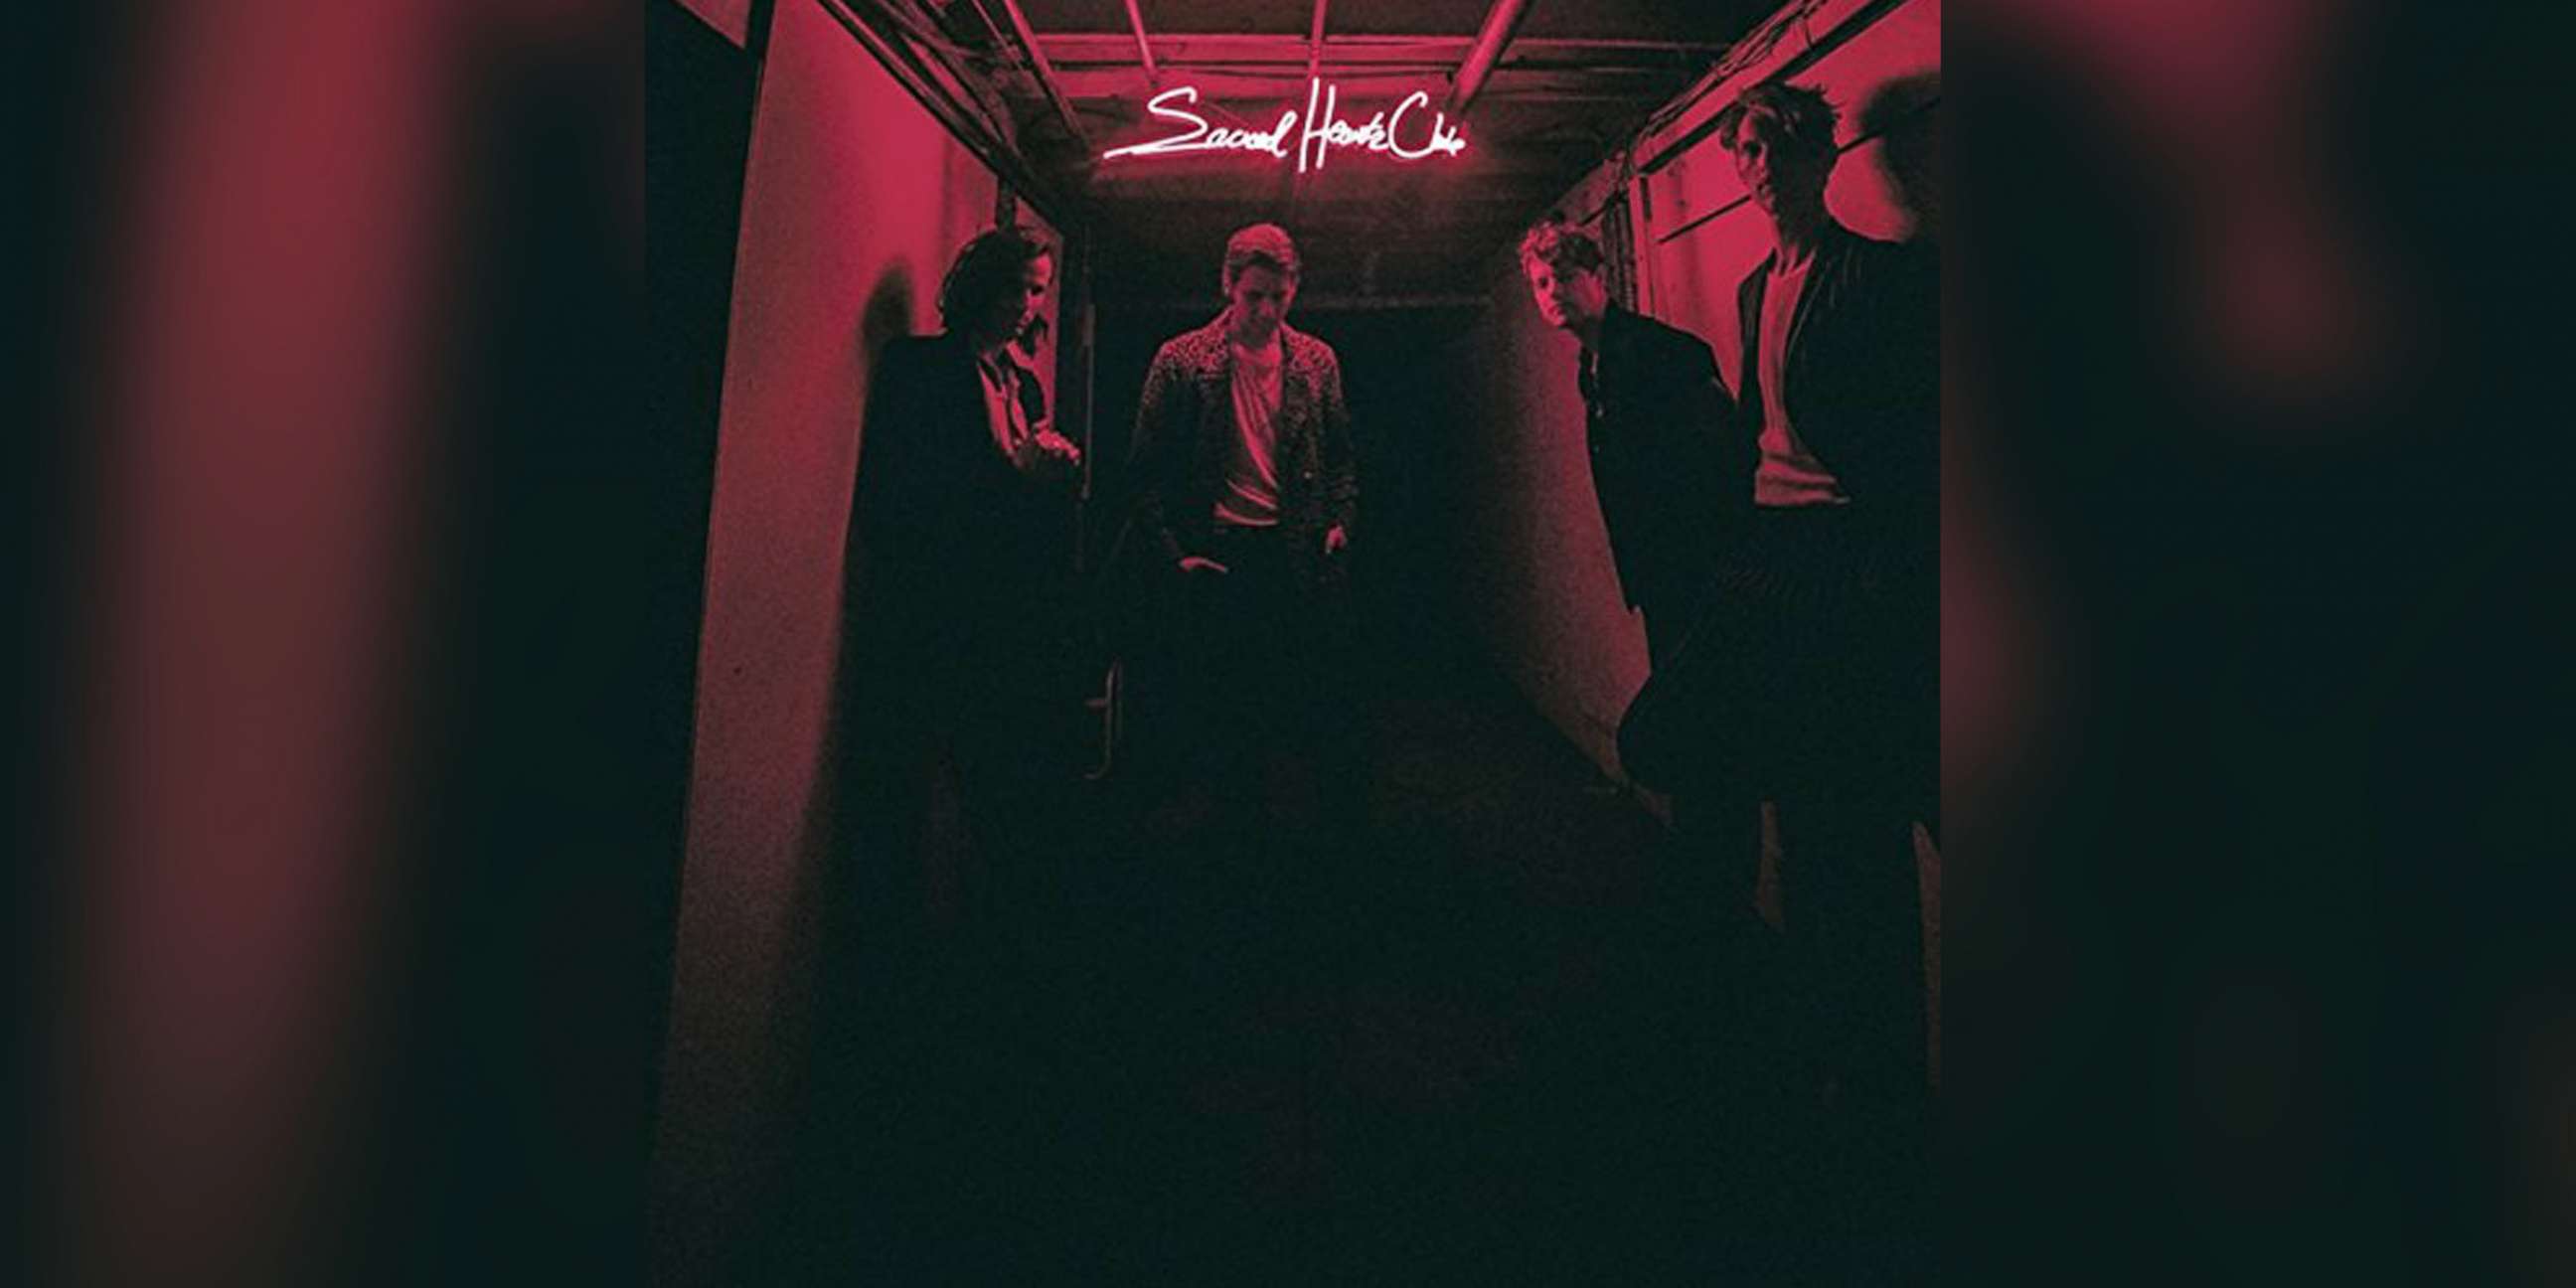 PHOTO: Foster the People - "Sacred Hearts Club" 